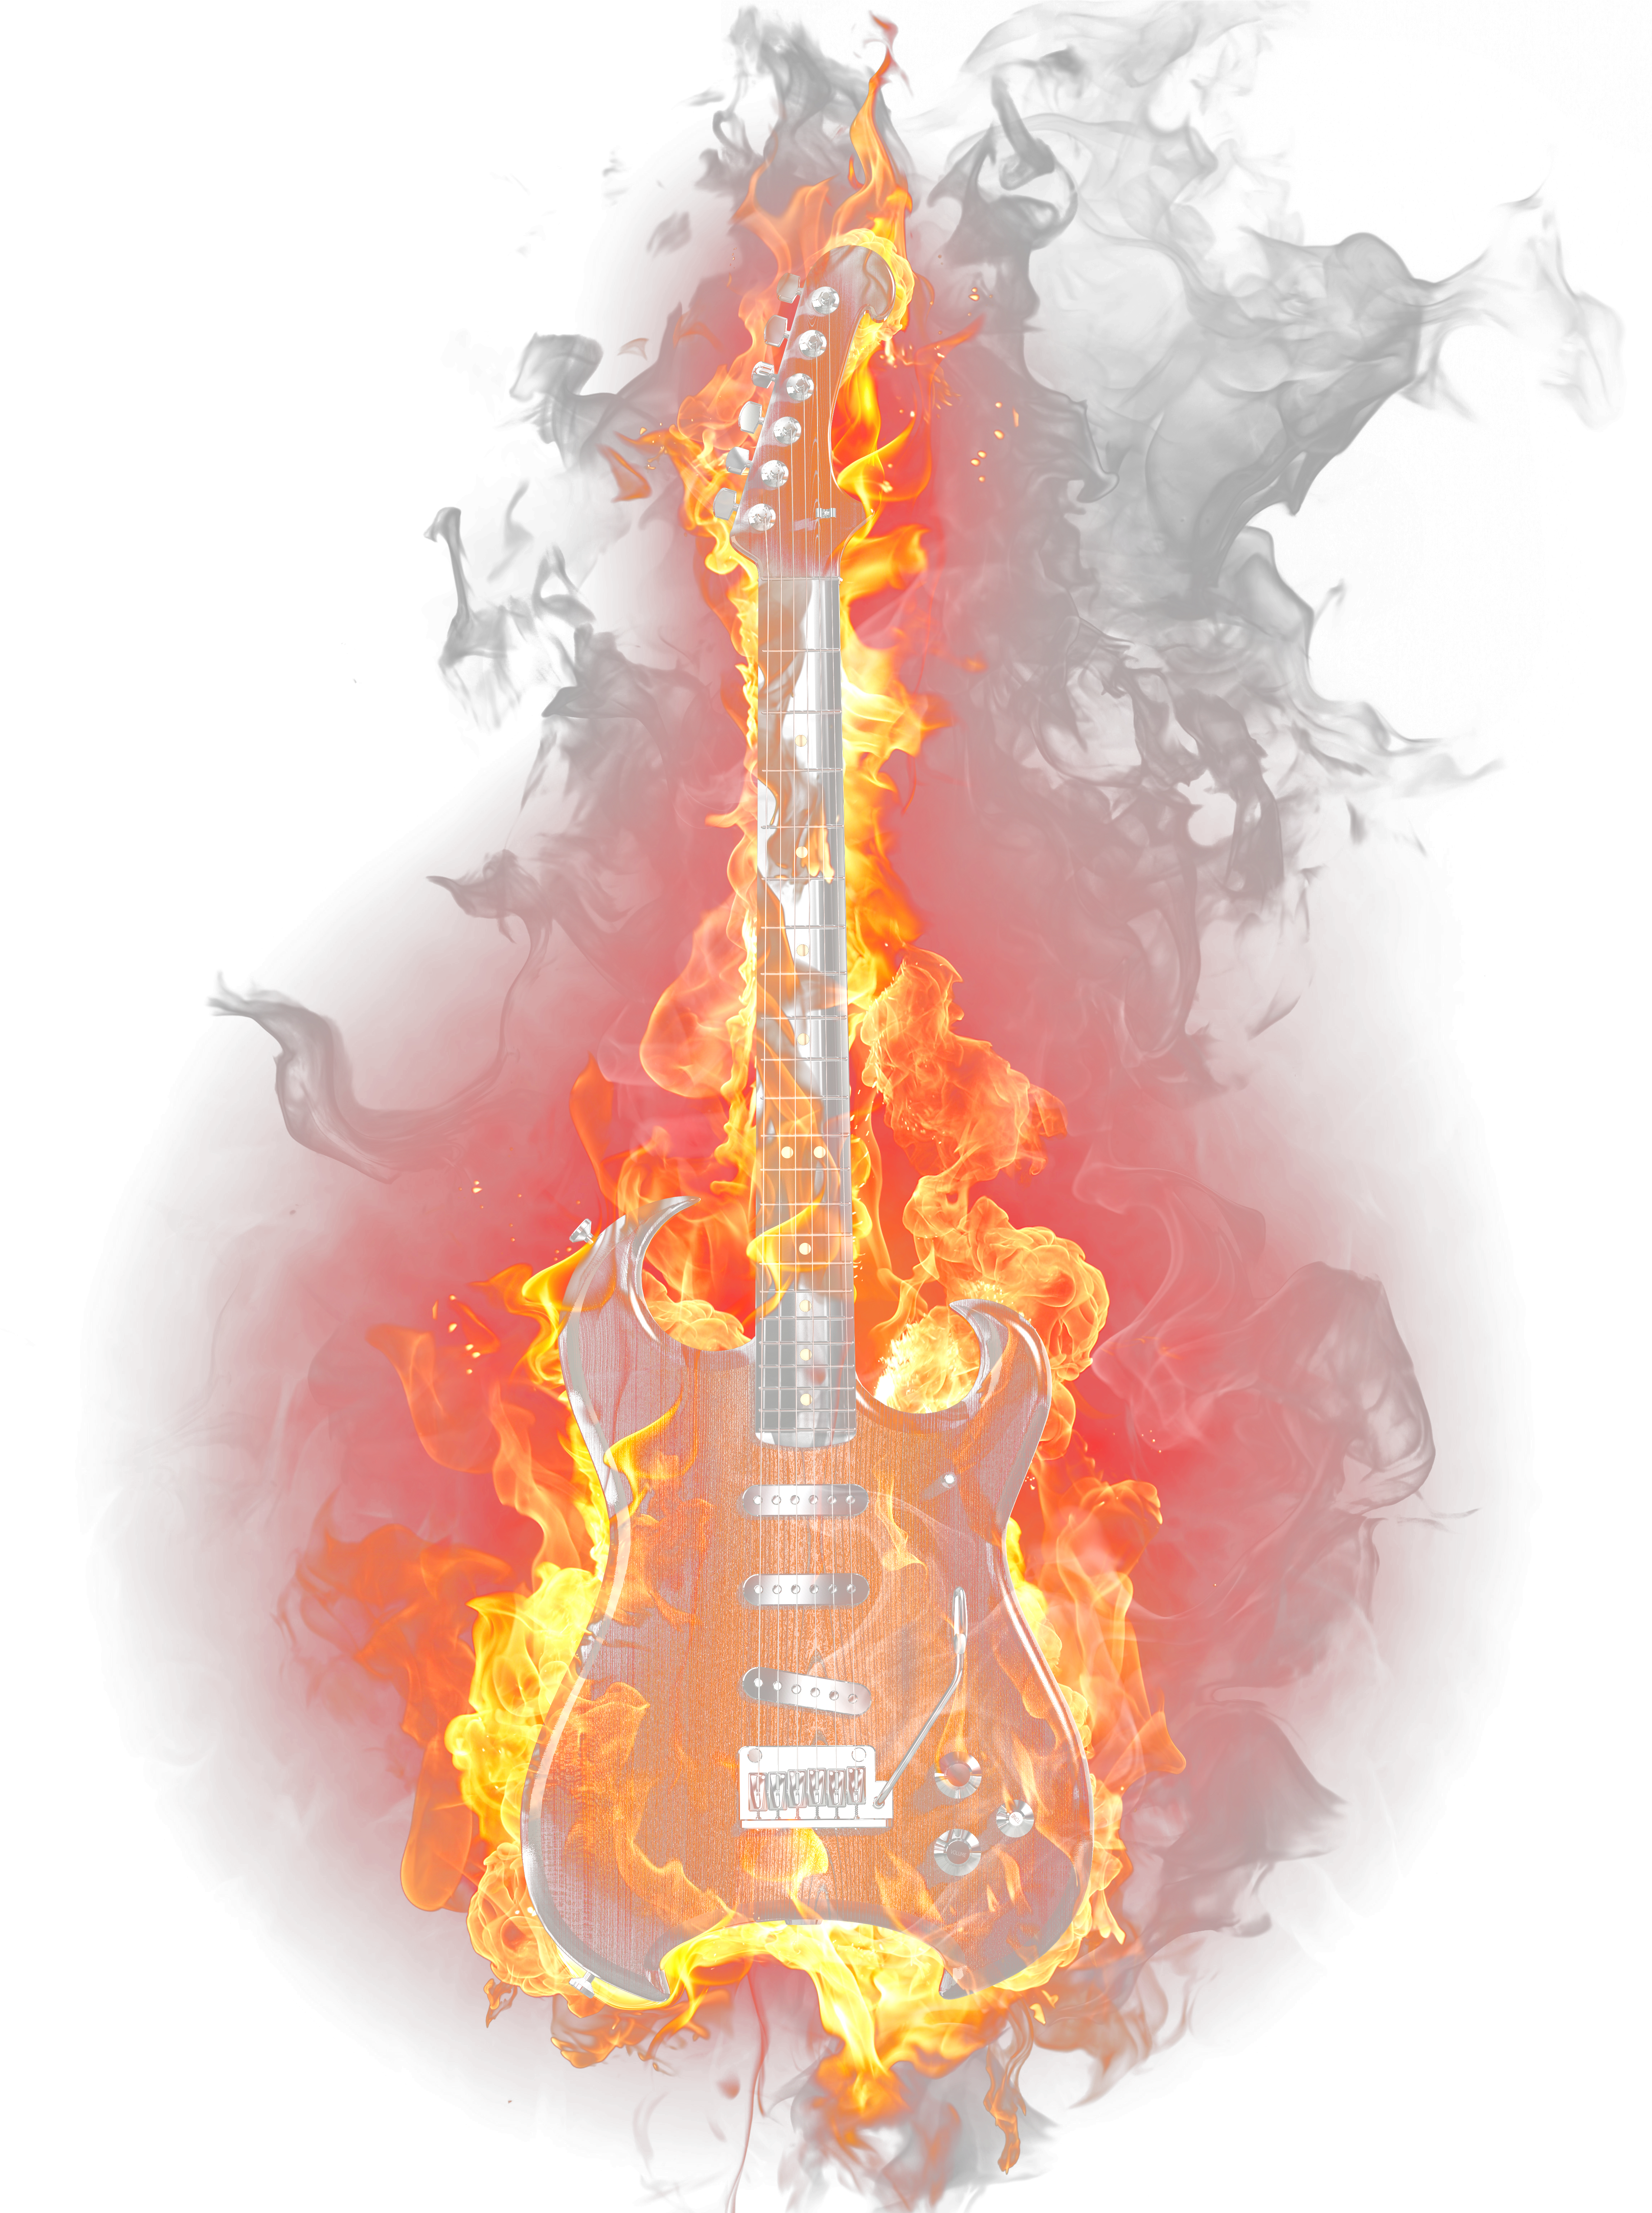 A Guitar On Fire With Smoke